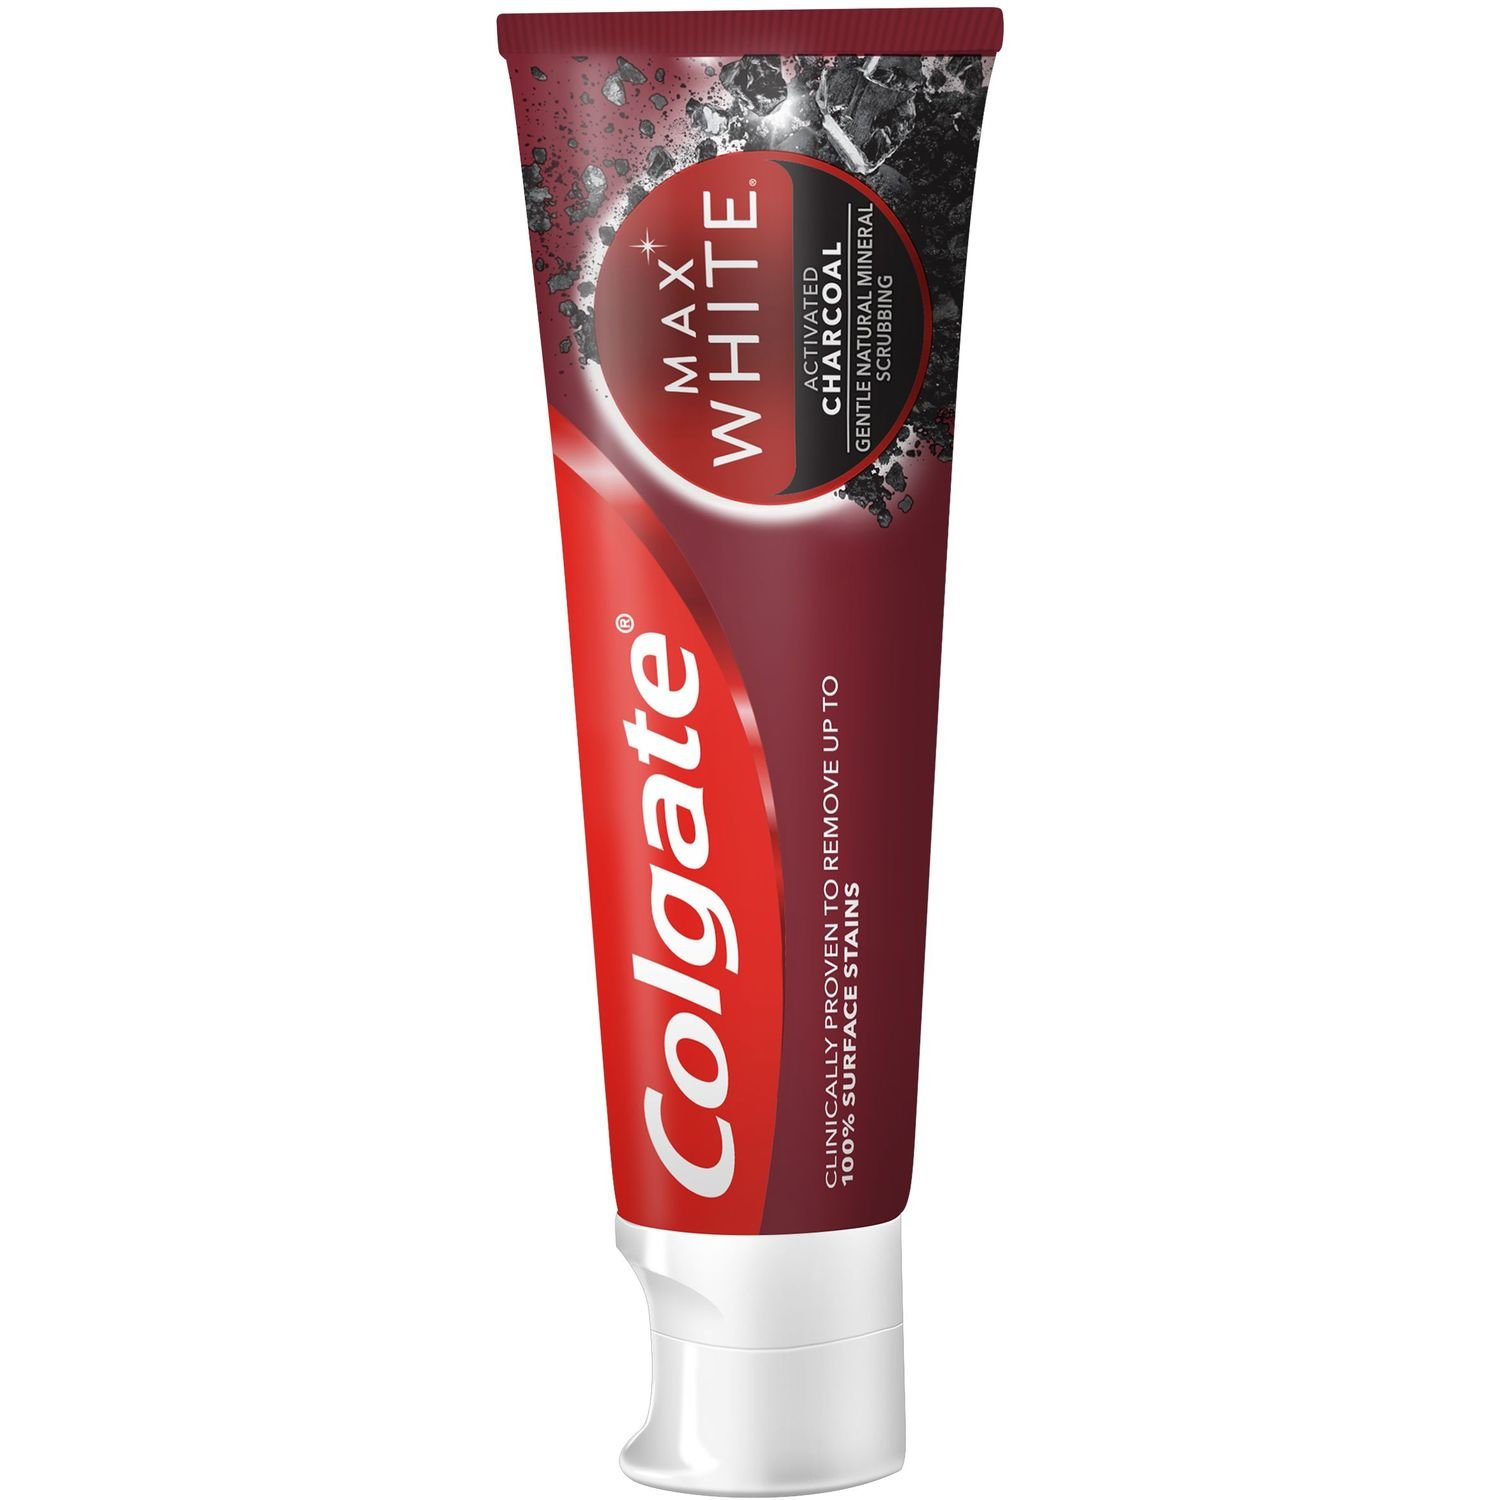 Зубная паста Colgate Max White Activated Charcoal 75 мл - фото 3